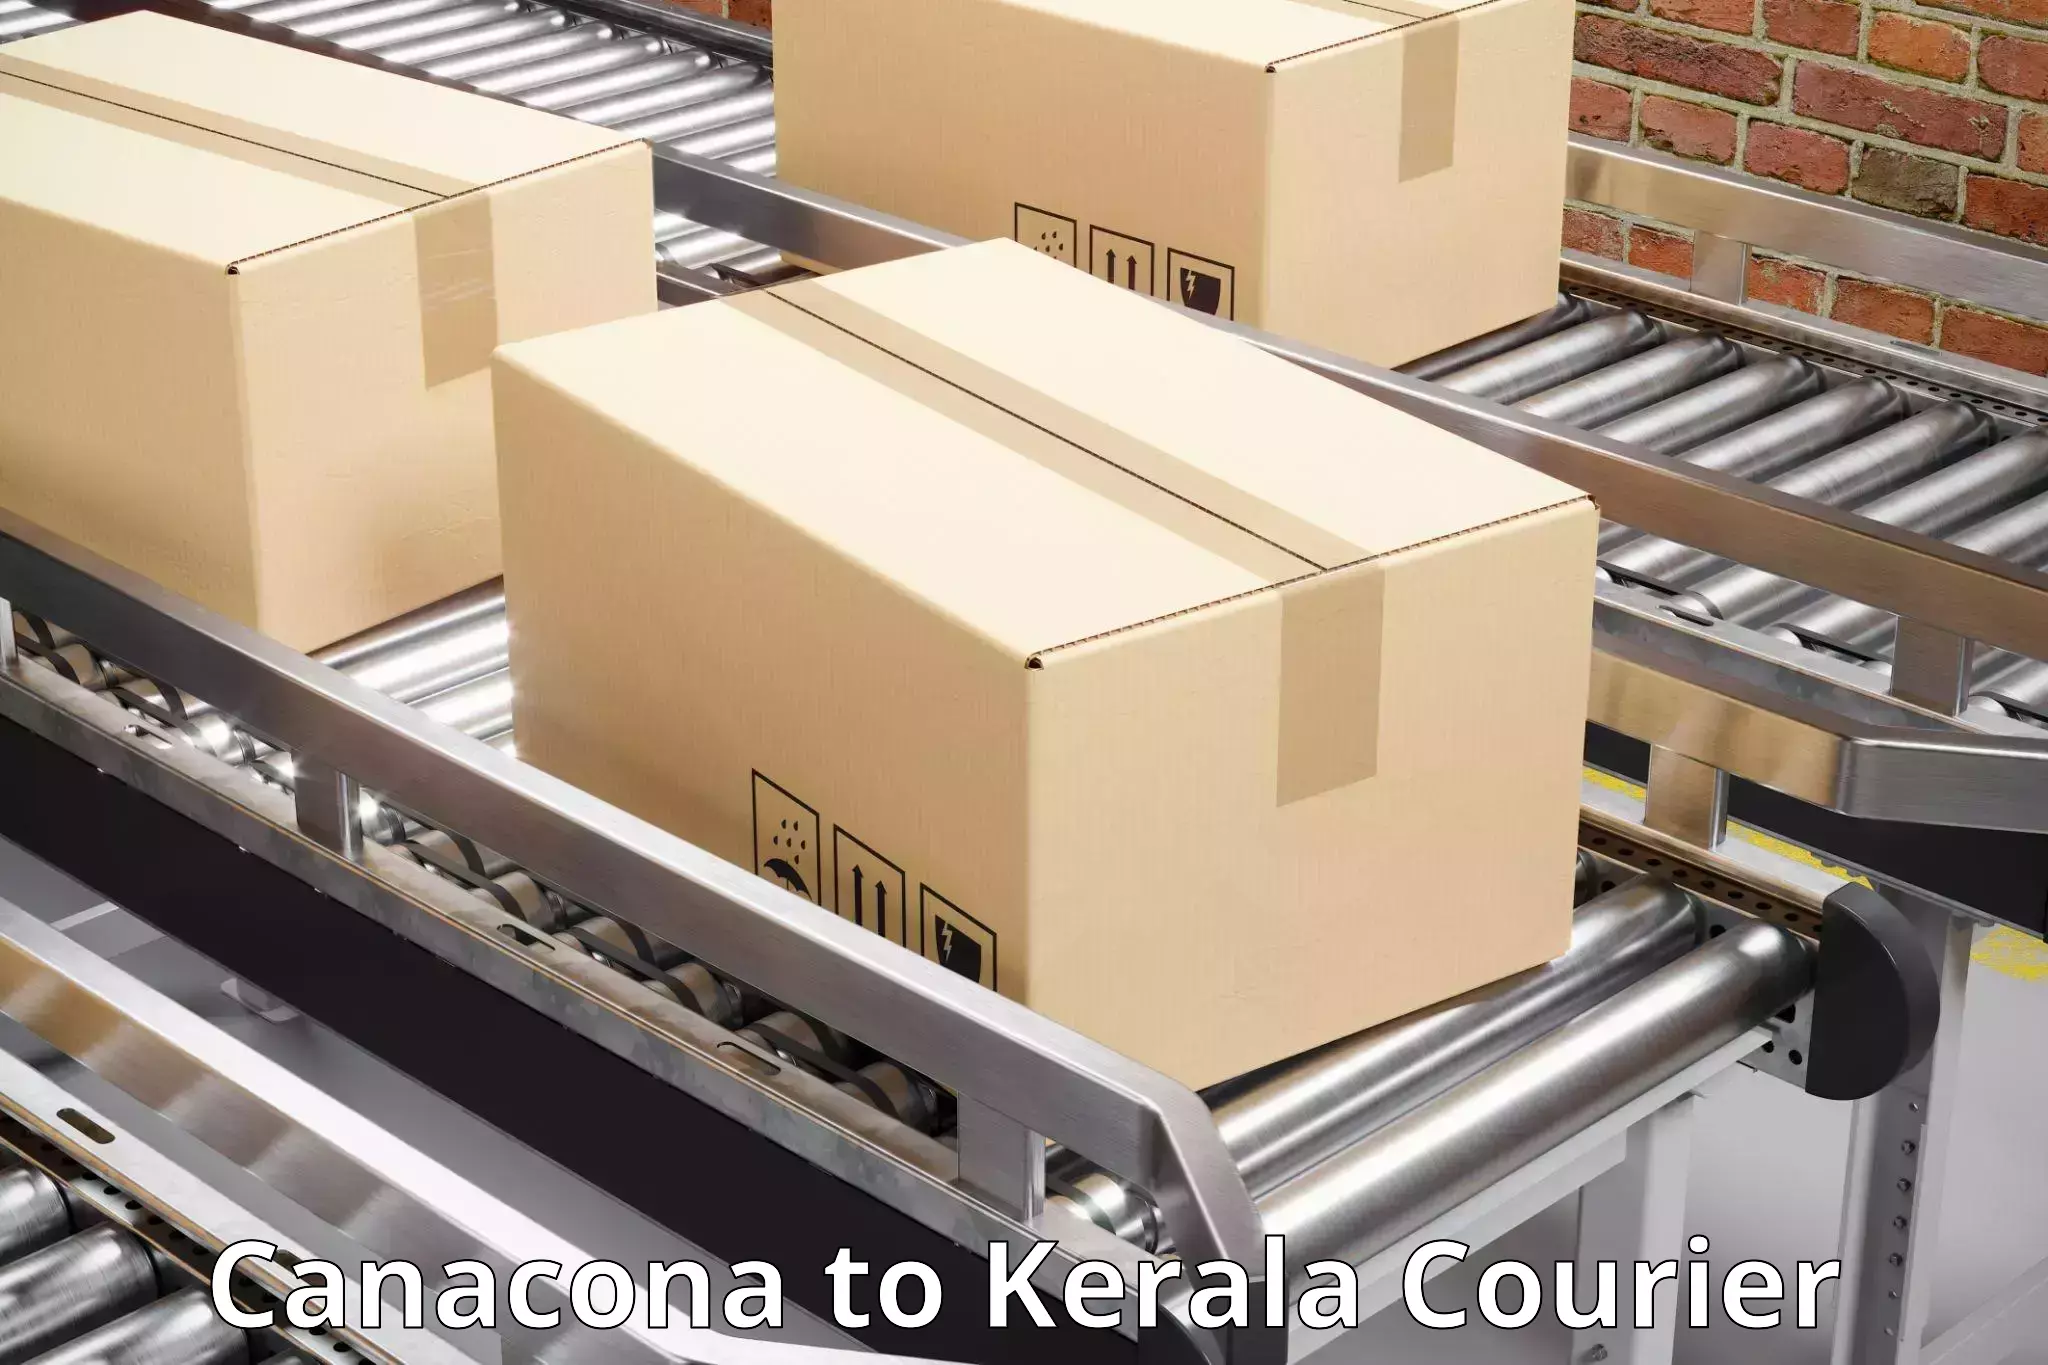 Express courier capabilities Canacona to Cochin University of Science and Technology